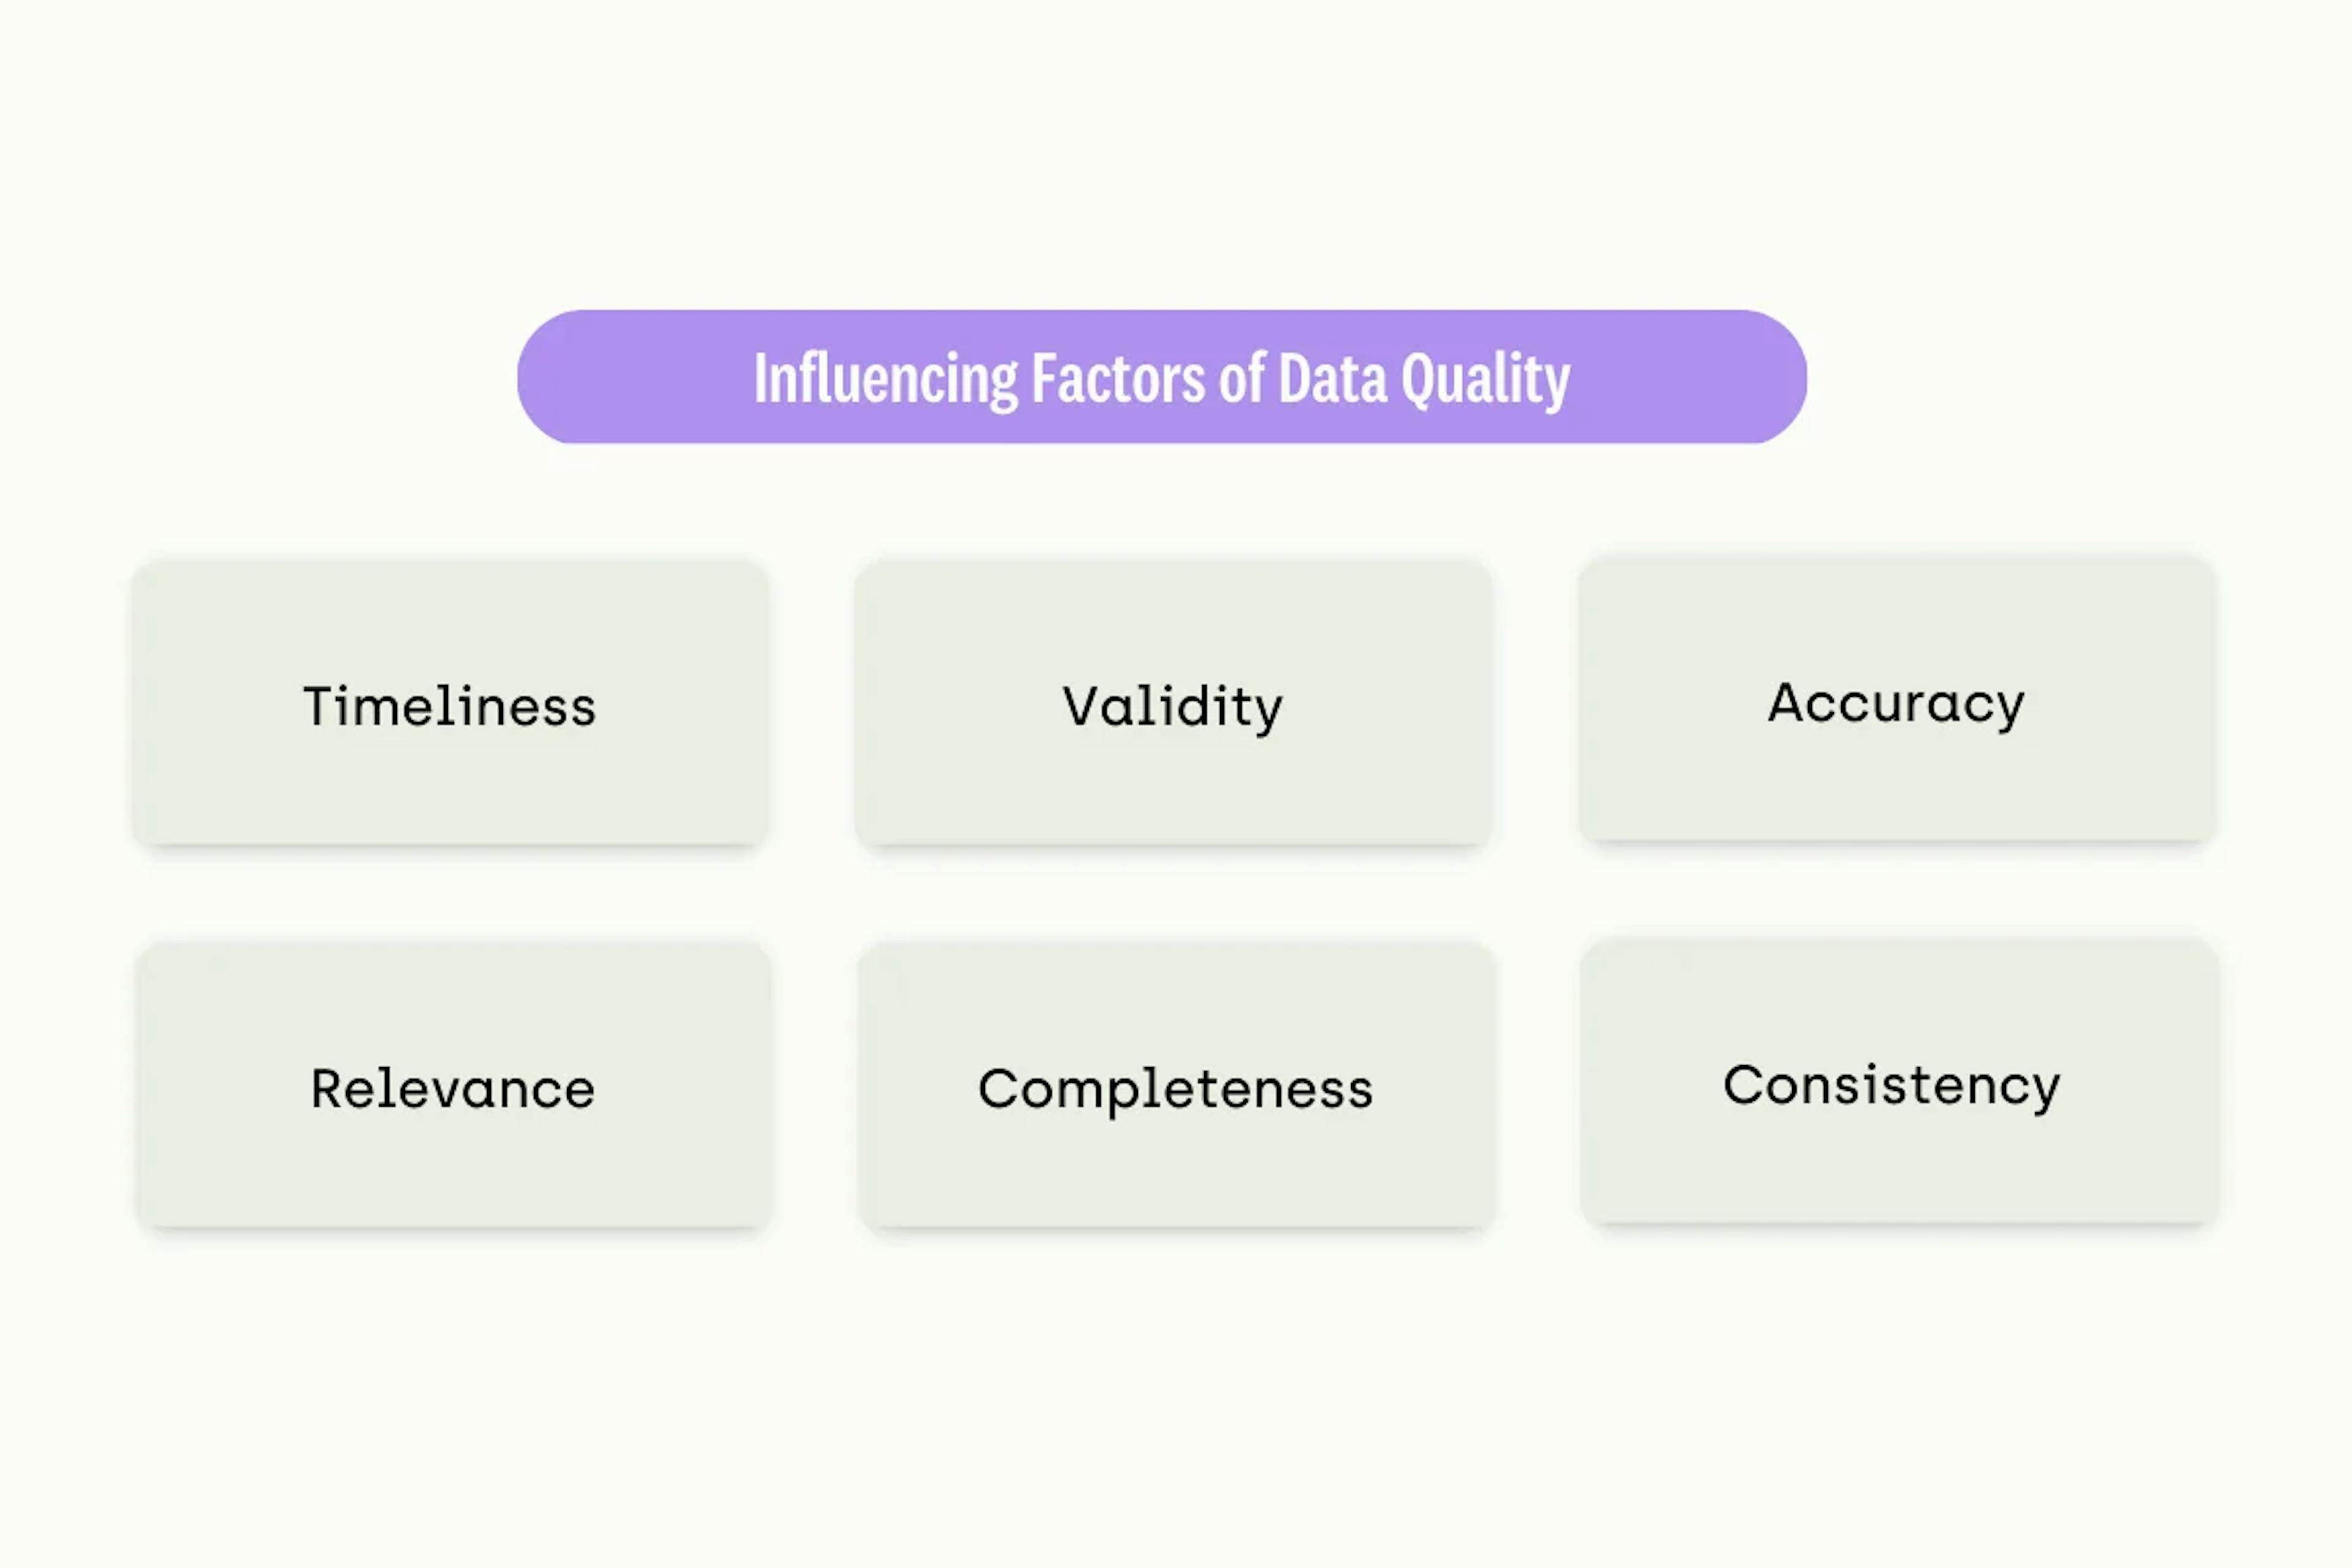 Influencing Factors of Data Quality